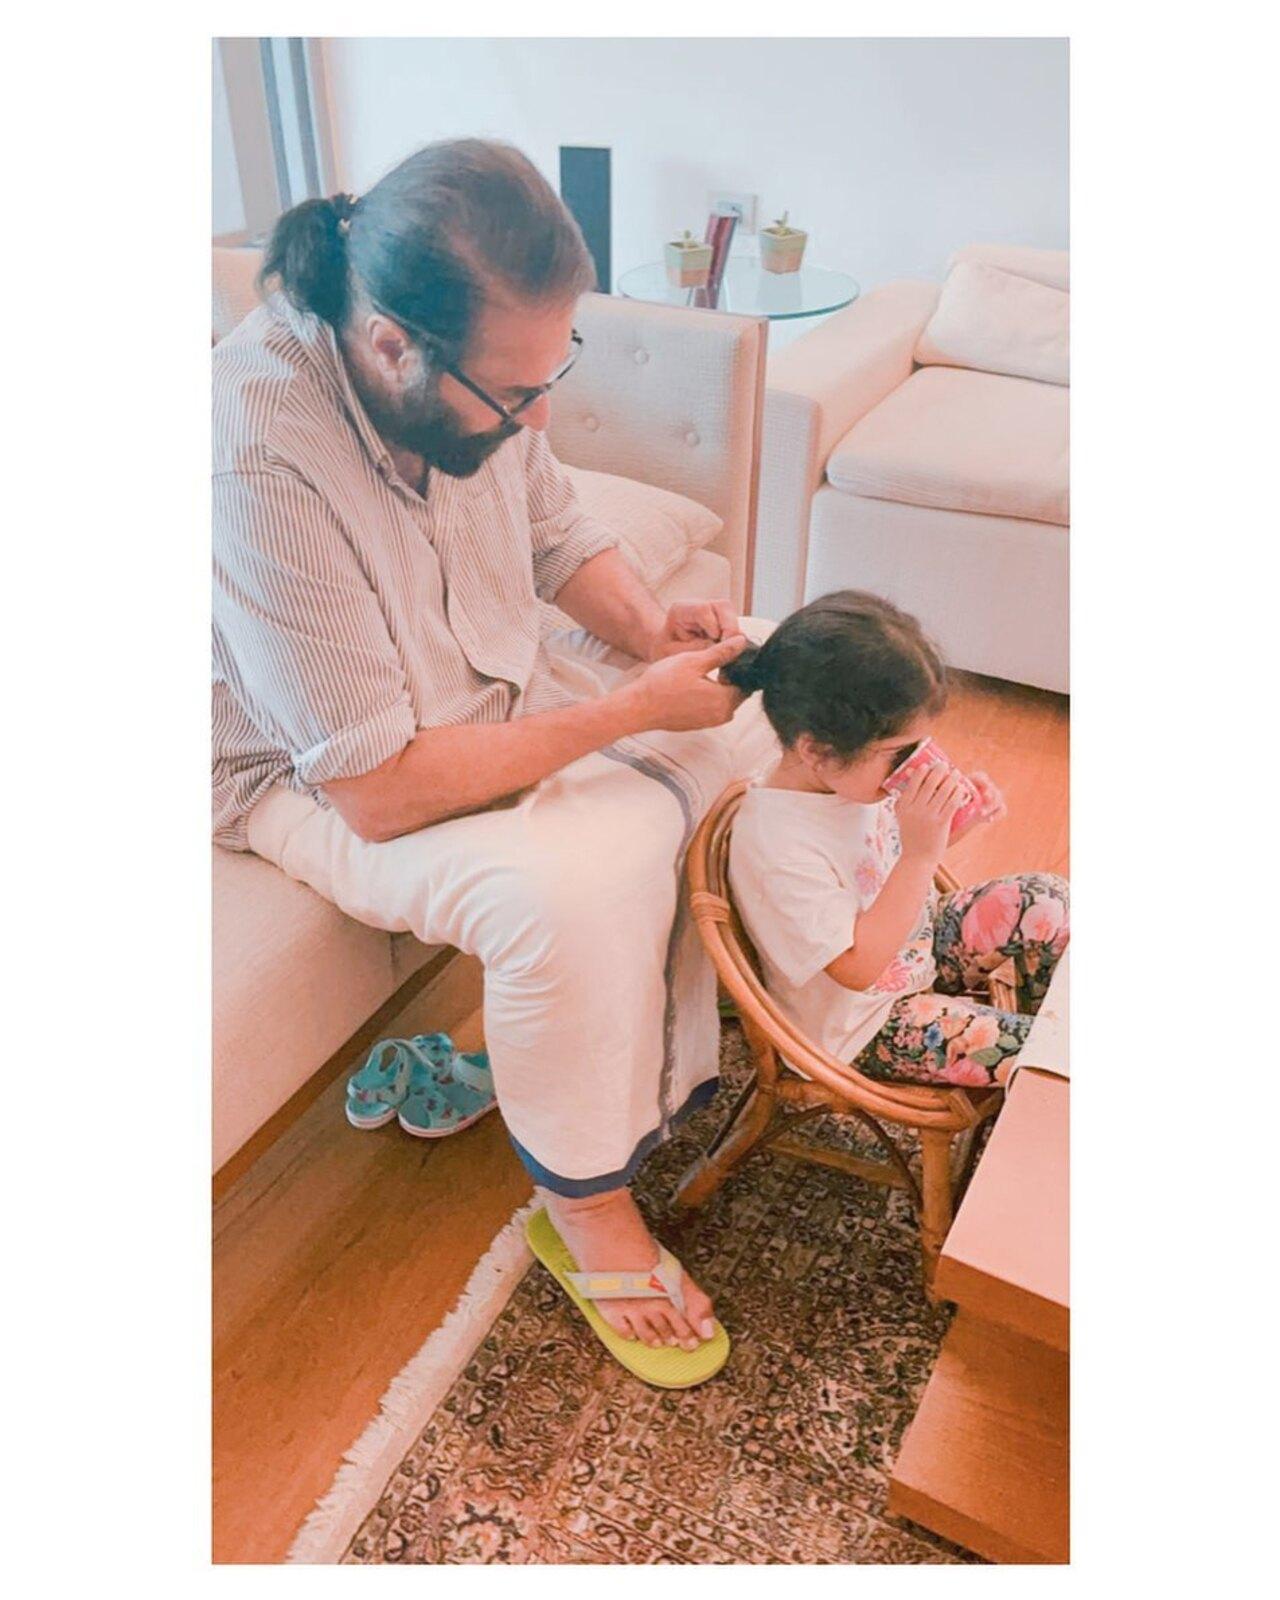 Mammootty adorably ties his granddaughter's hair as she get occupied with her toy